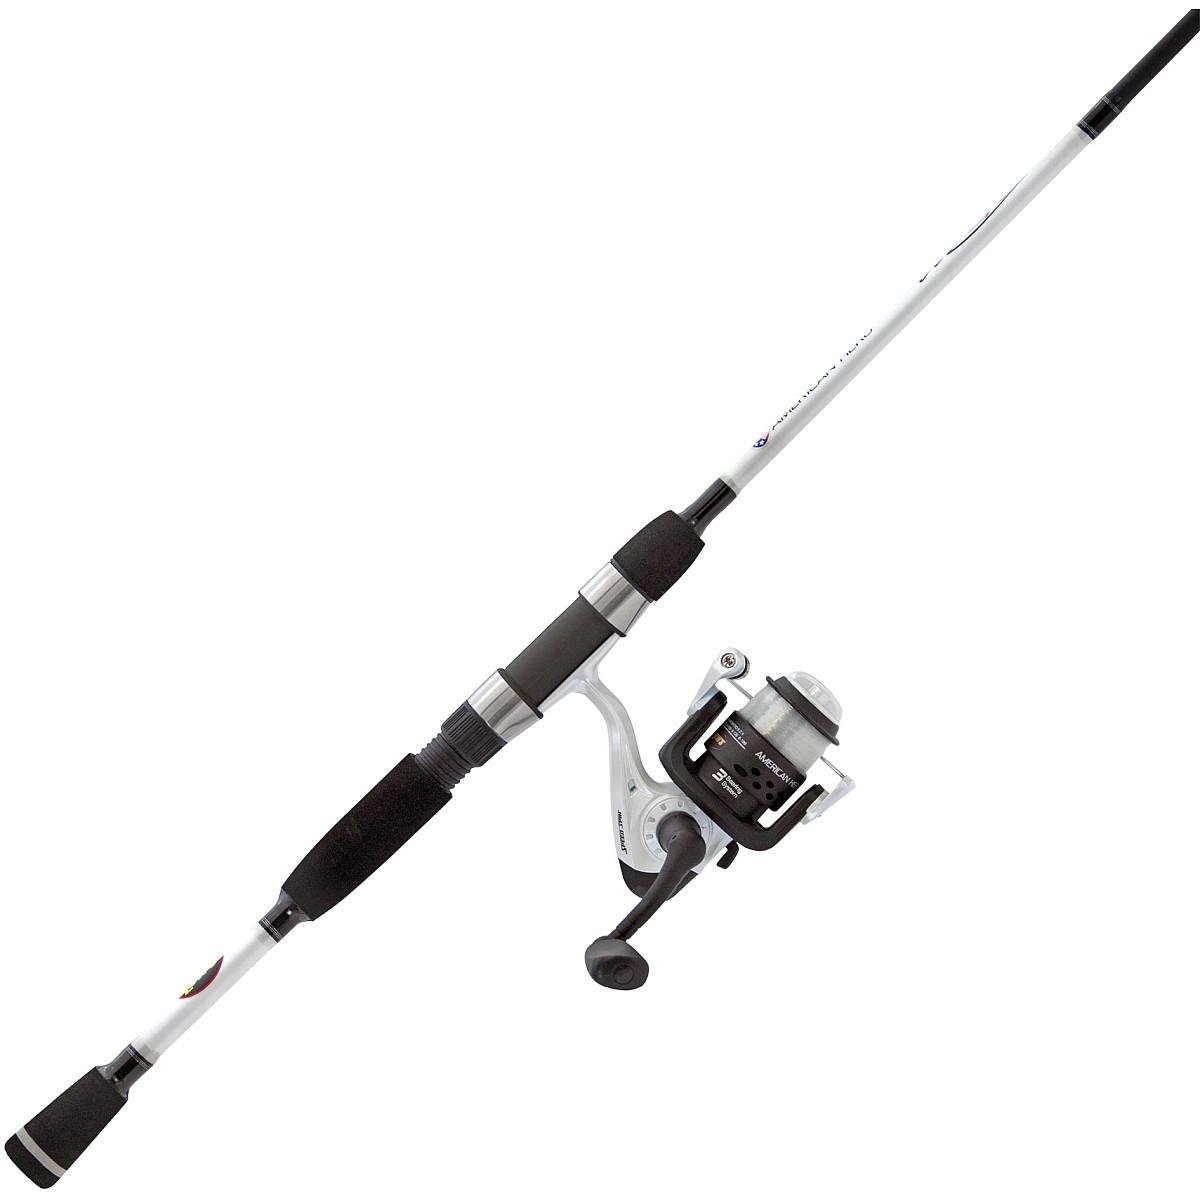 2-Piece 5' Lew's Fishing American Hero We Go 2 Light Spinning Rod & Reel Combo $19.94 + Free Shipping w/ Prime or on $35+